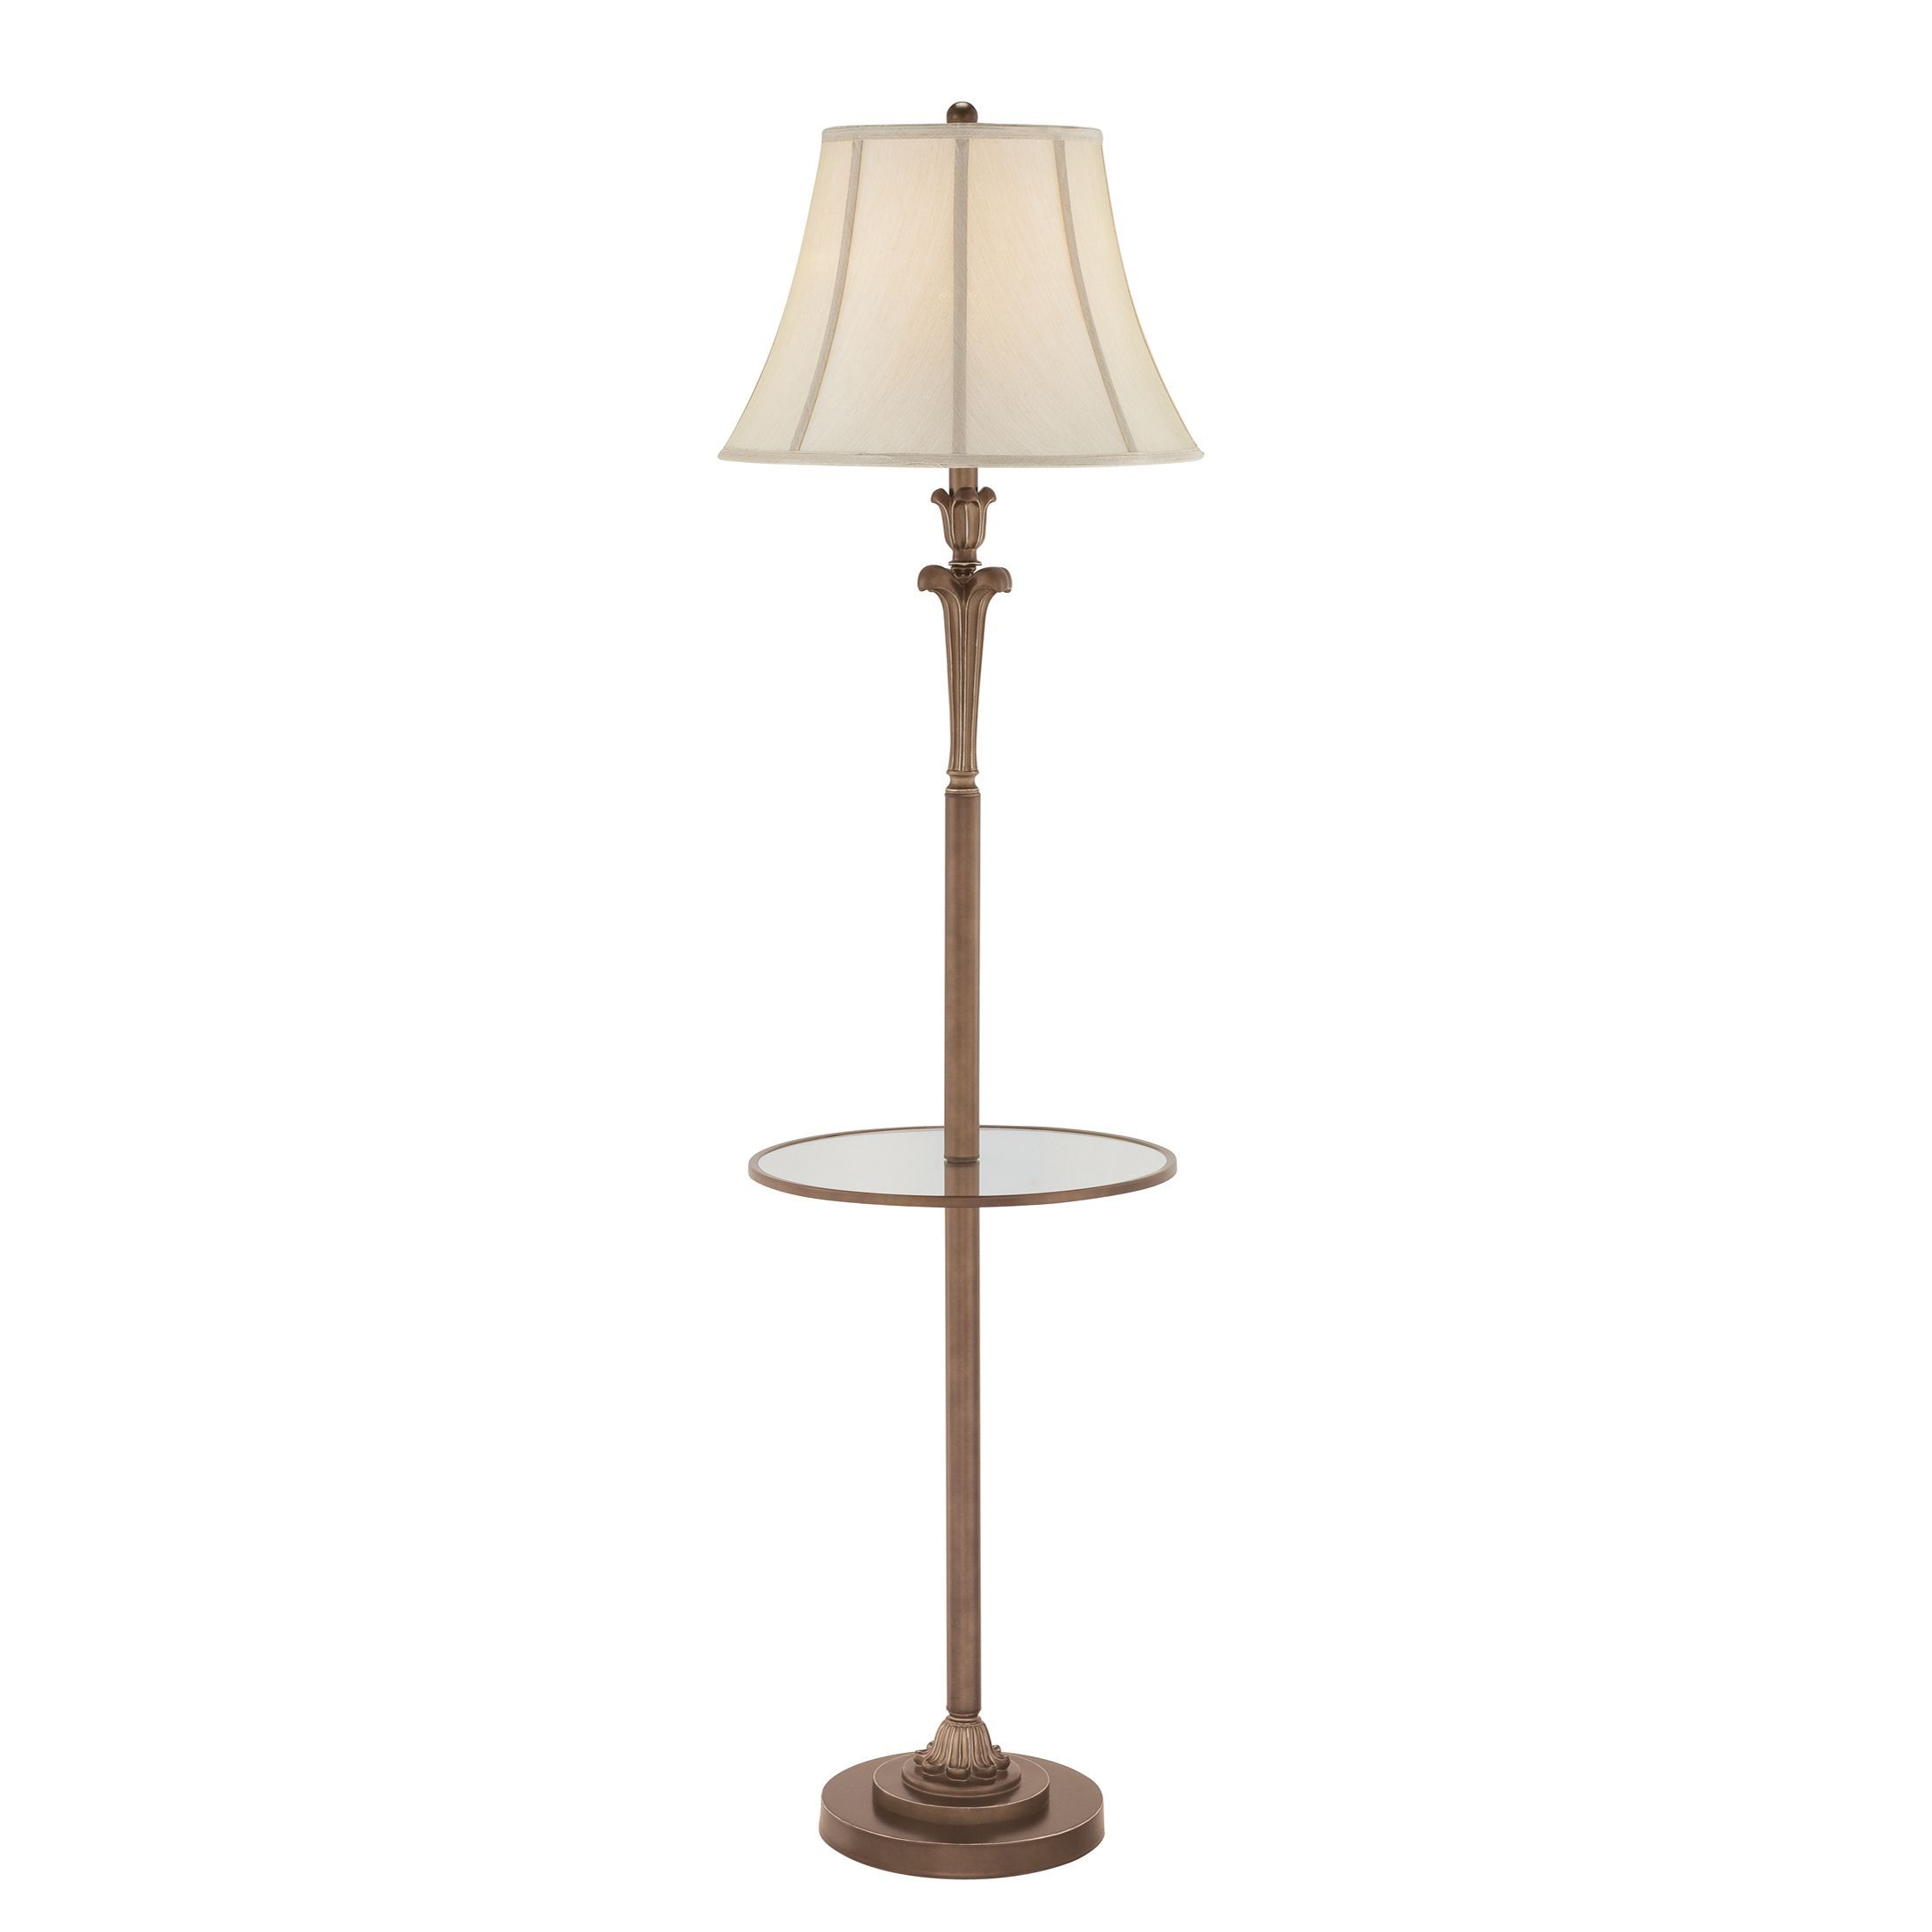 Quoizel Archer 1 Light Palladian Bronze Glass Floor Lamp intended for proportions 2200 X 2200